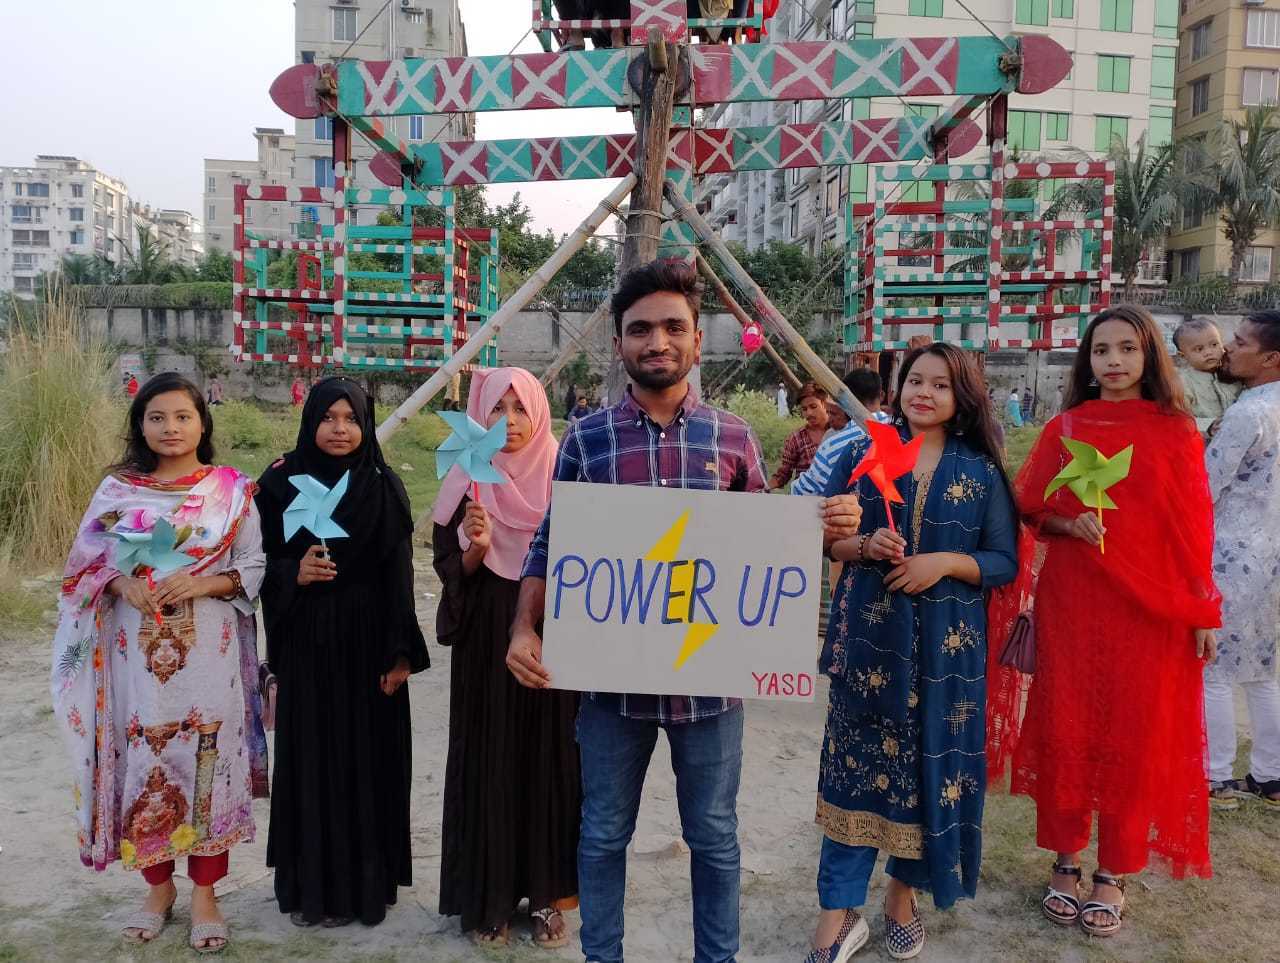 Dhaka, Bangladesh, October 30: in the lead up to Power Up, the youth organization YASD got together to promote our calls for climate solutions